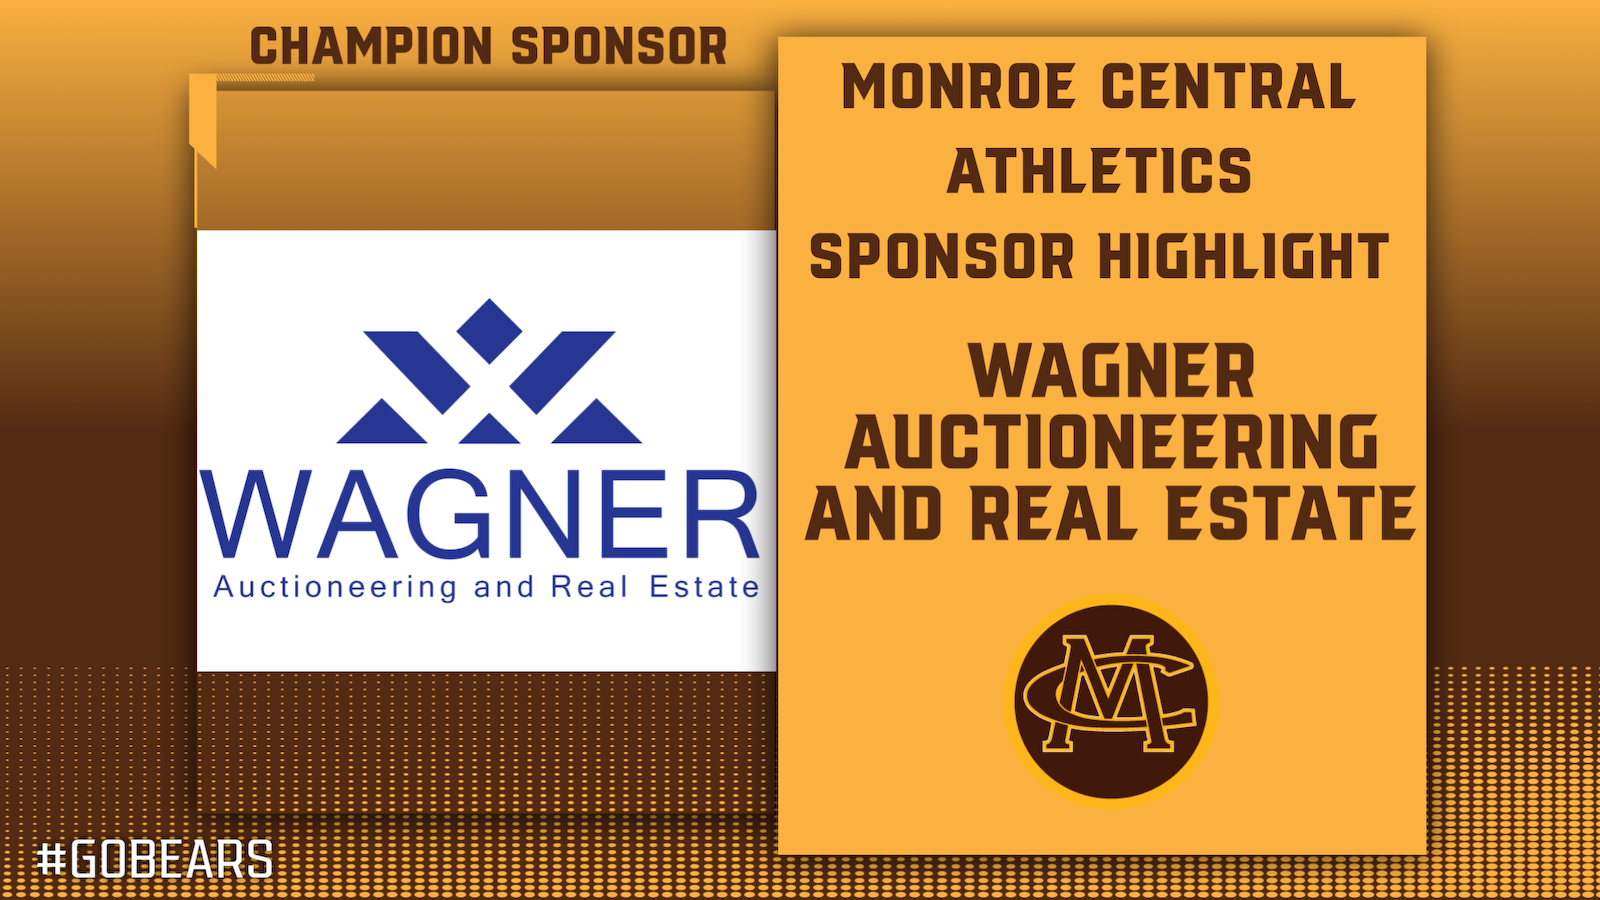 CHAMPION SPONSOR - Wagner Auctioneering and Real Estate